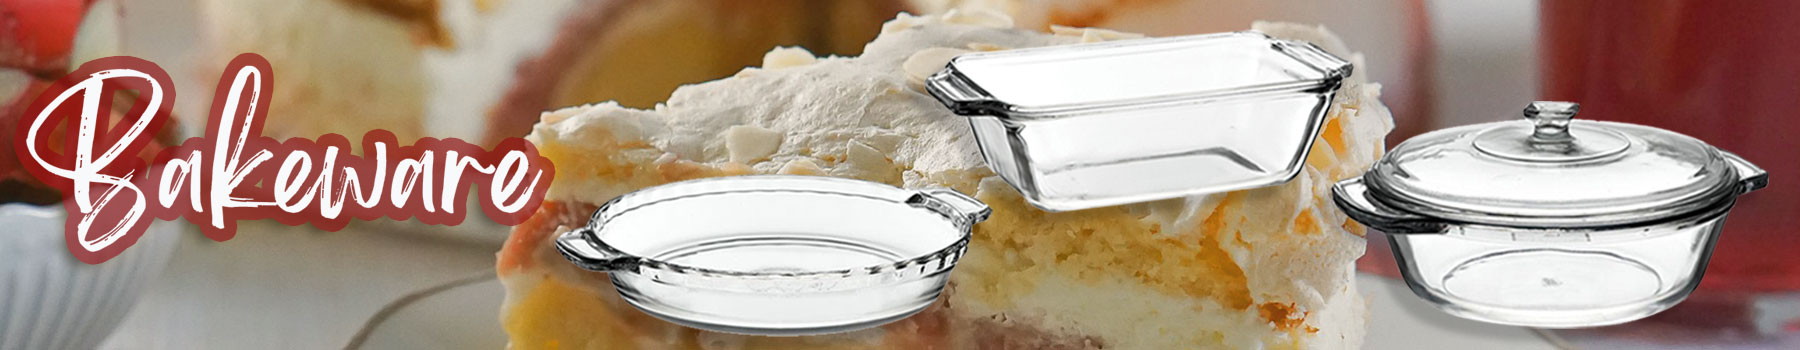 Bakeware - Pie Pans for the Holidays